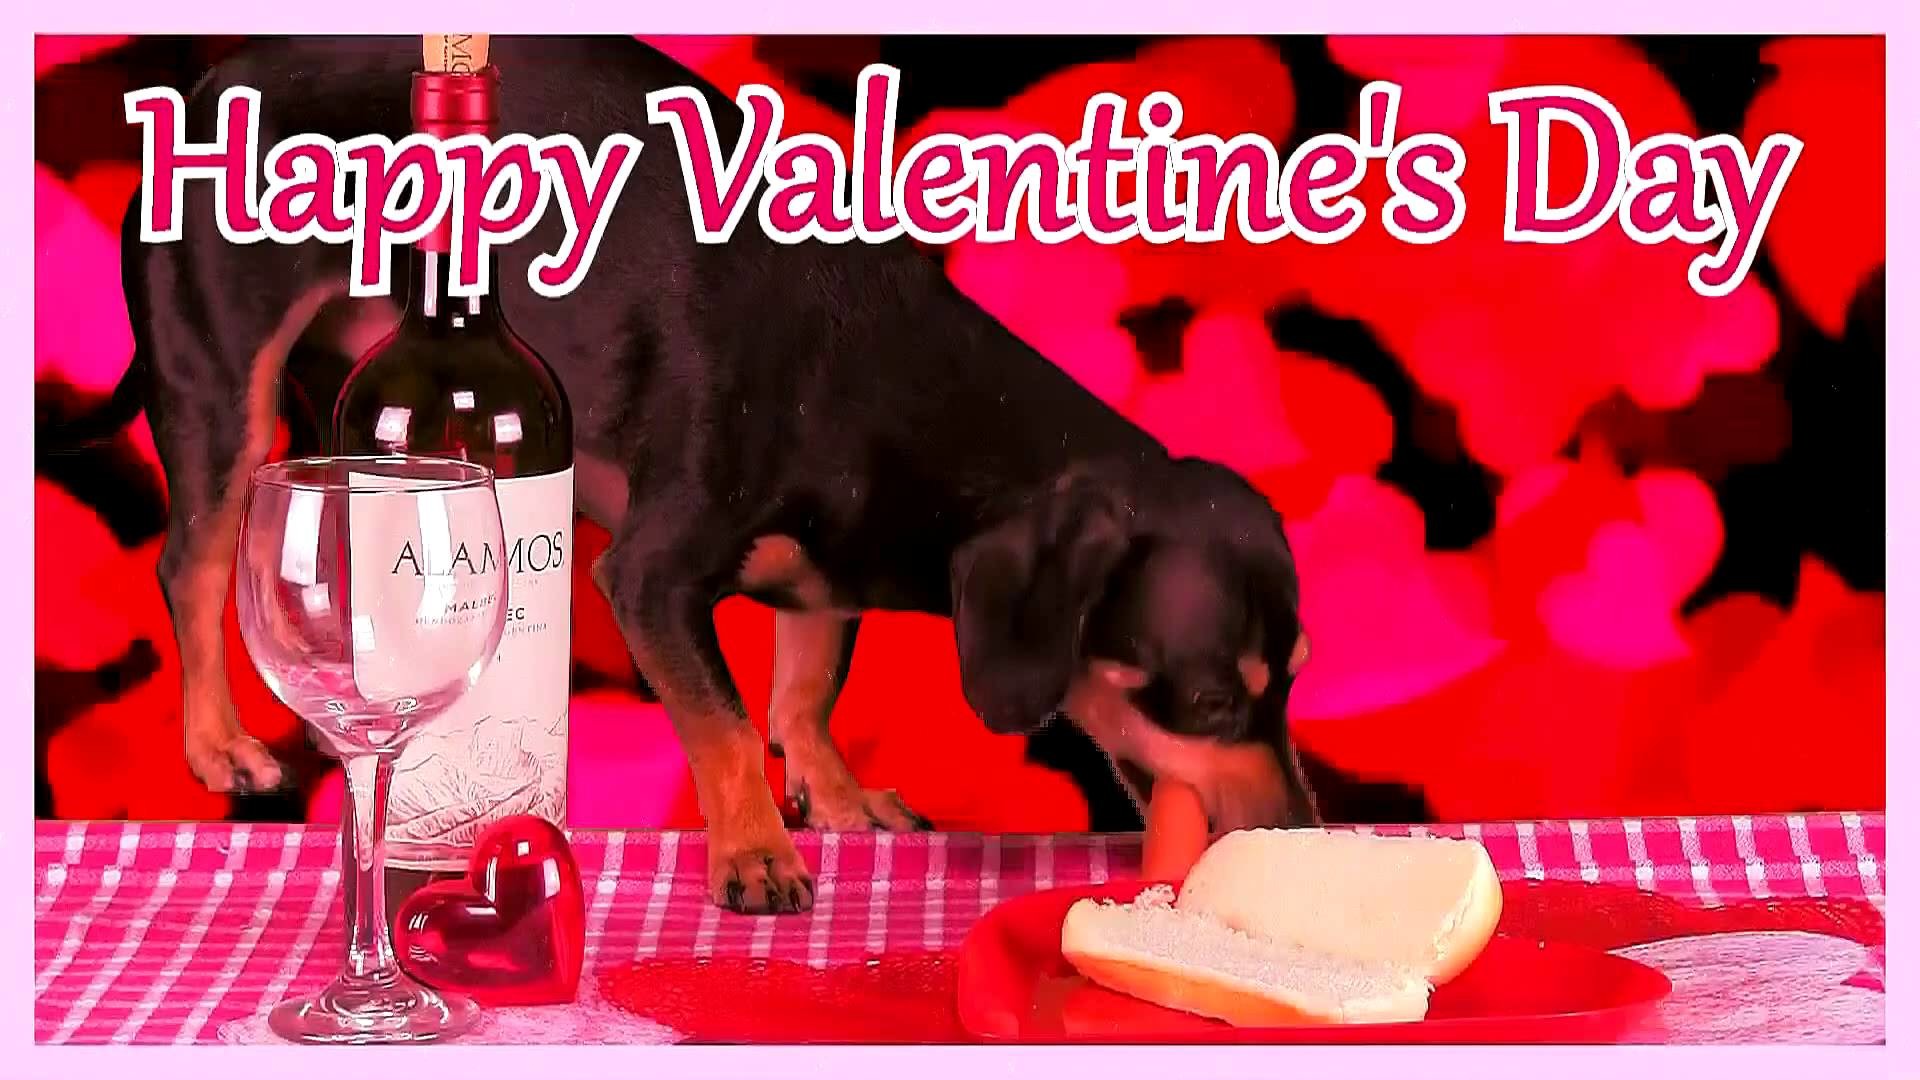 1920x1080 Happy Valentine's Day! Cute Puppy Eats a Hot Dog!